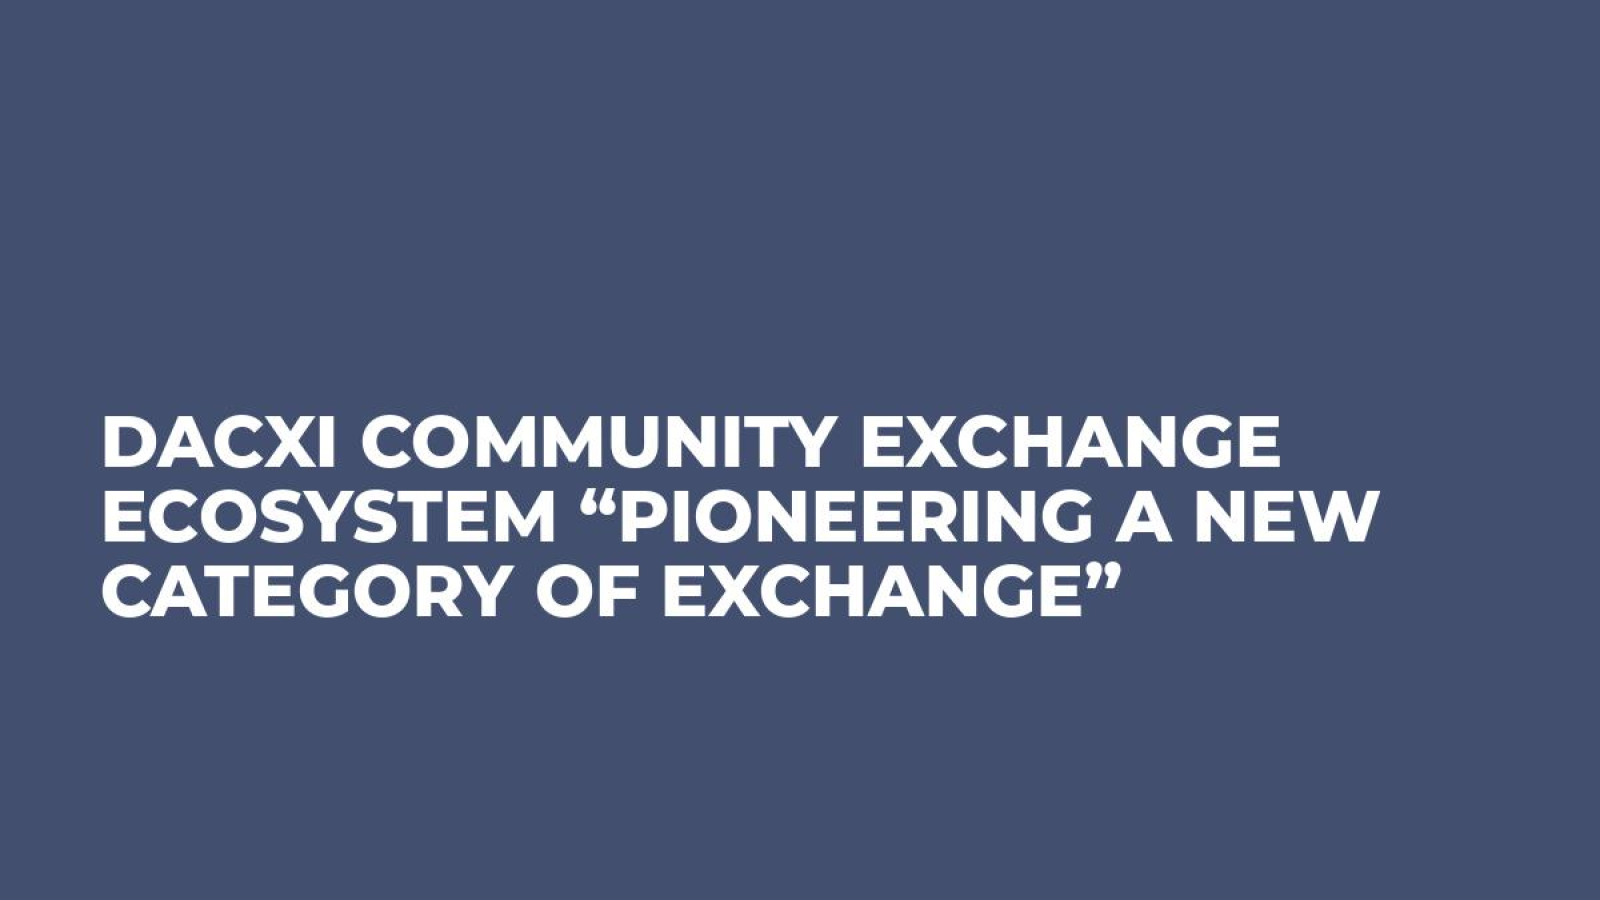 Dacxi Community Exchange Ecosystem “Pioneering a New Category of Exchange”